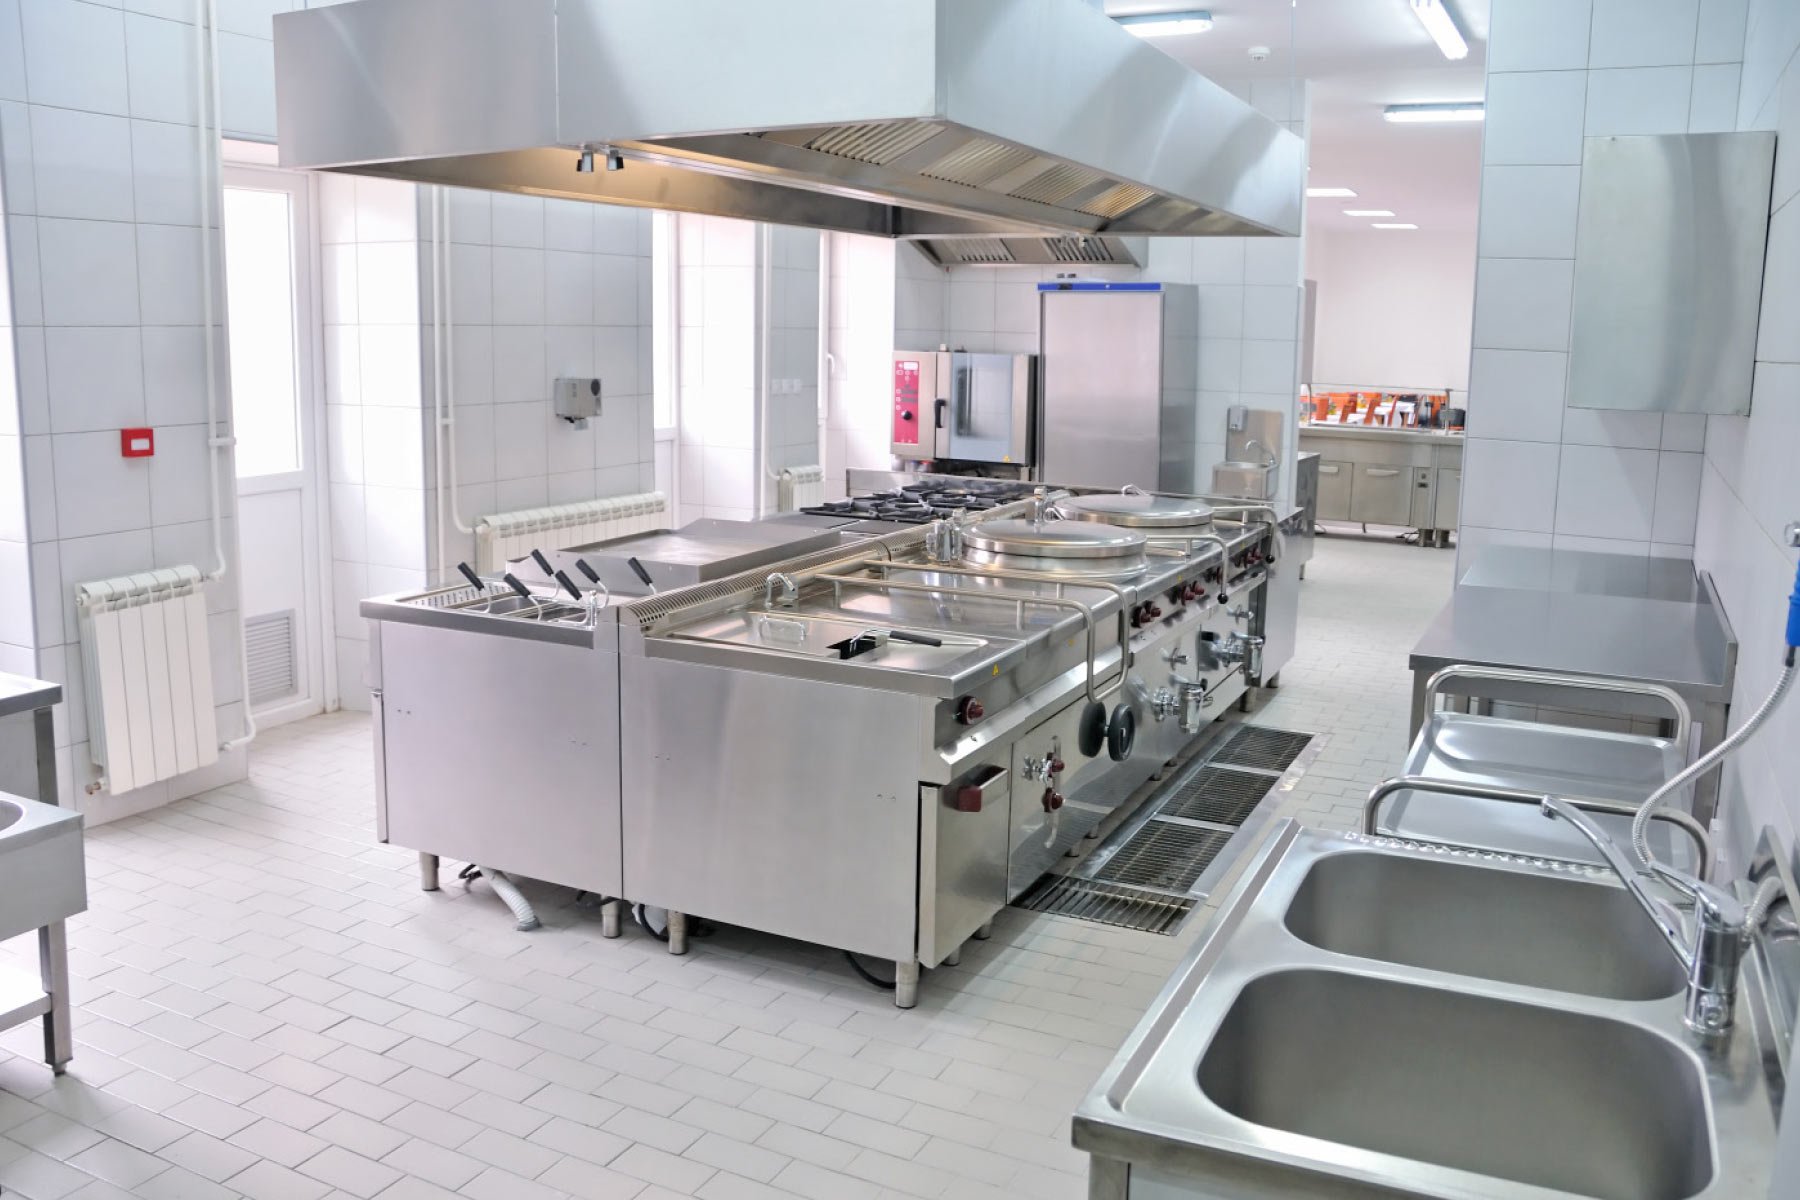 Everything You Need to Know About Commercial Kitchen Design | Sam Tell